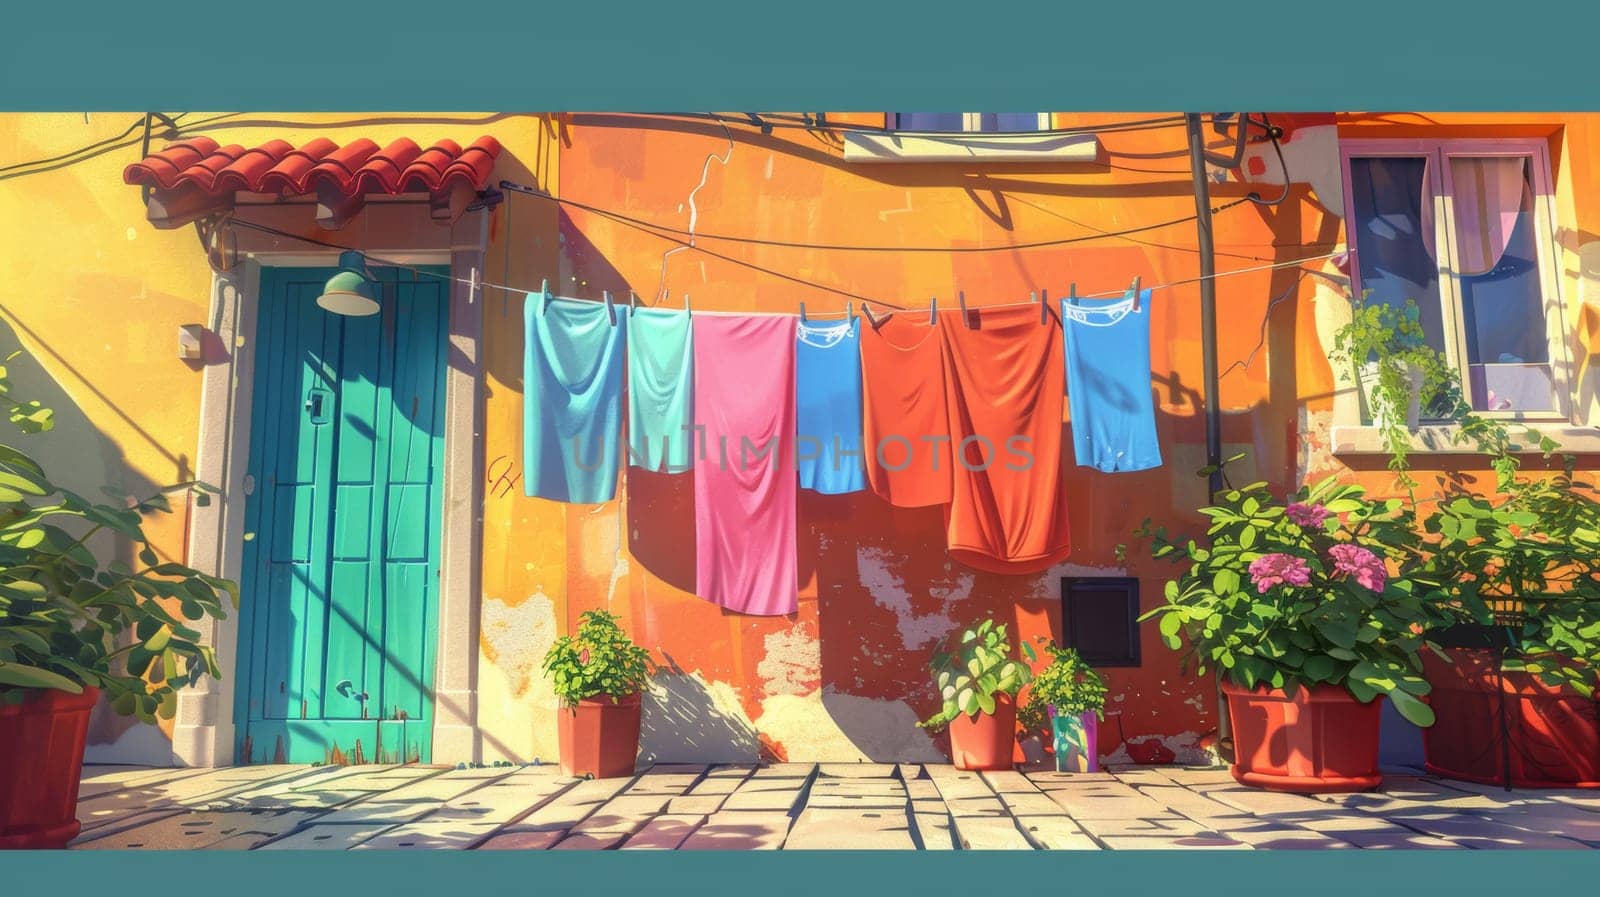 A painting of a colorful house with clothes hanging on the line